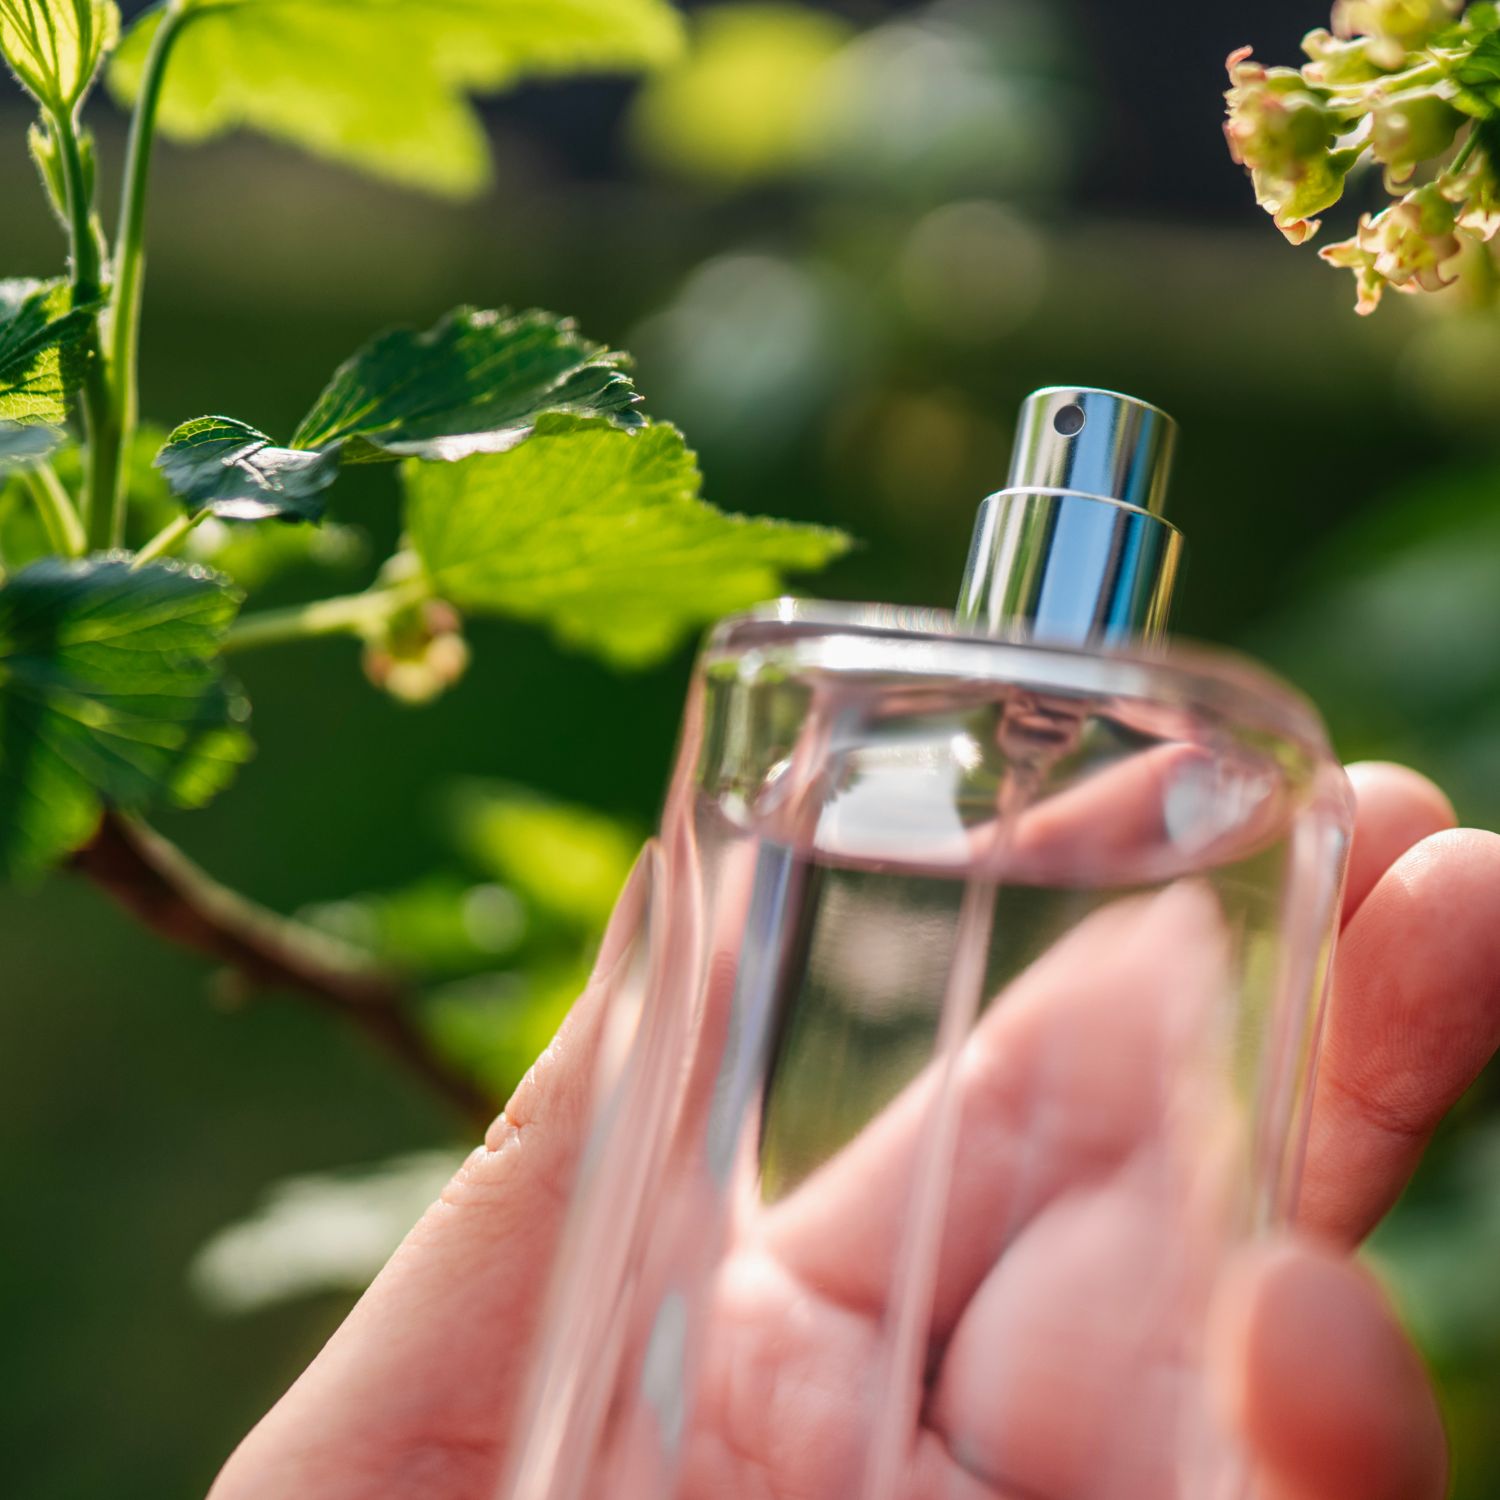  Yes, your perfume may be attracting insects—these 7 summer scents could help keep them away 